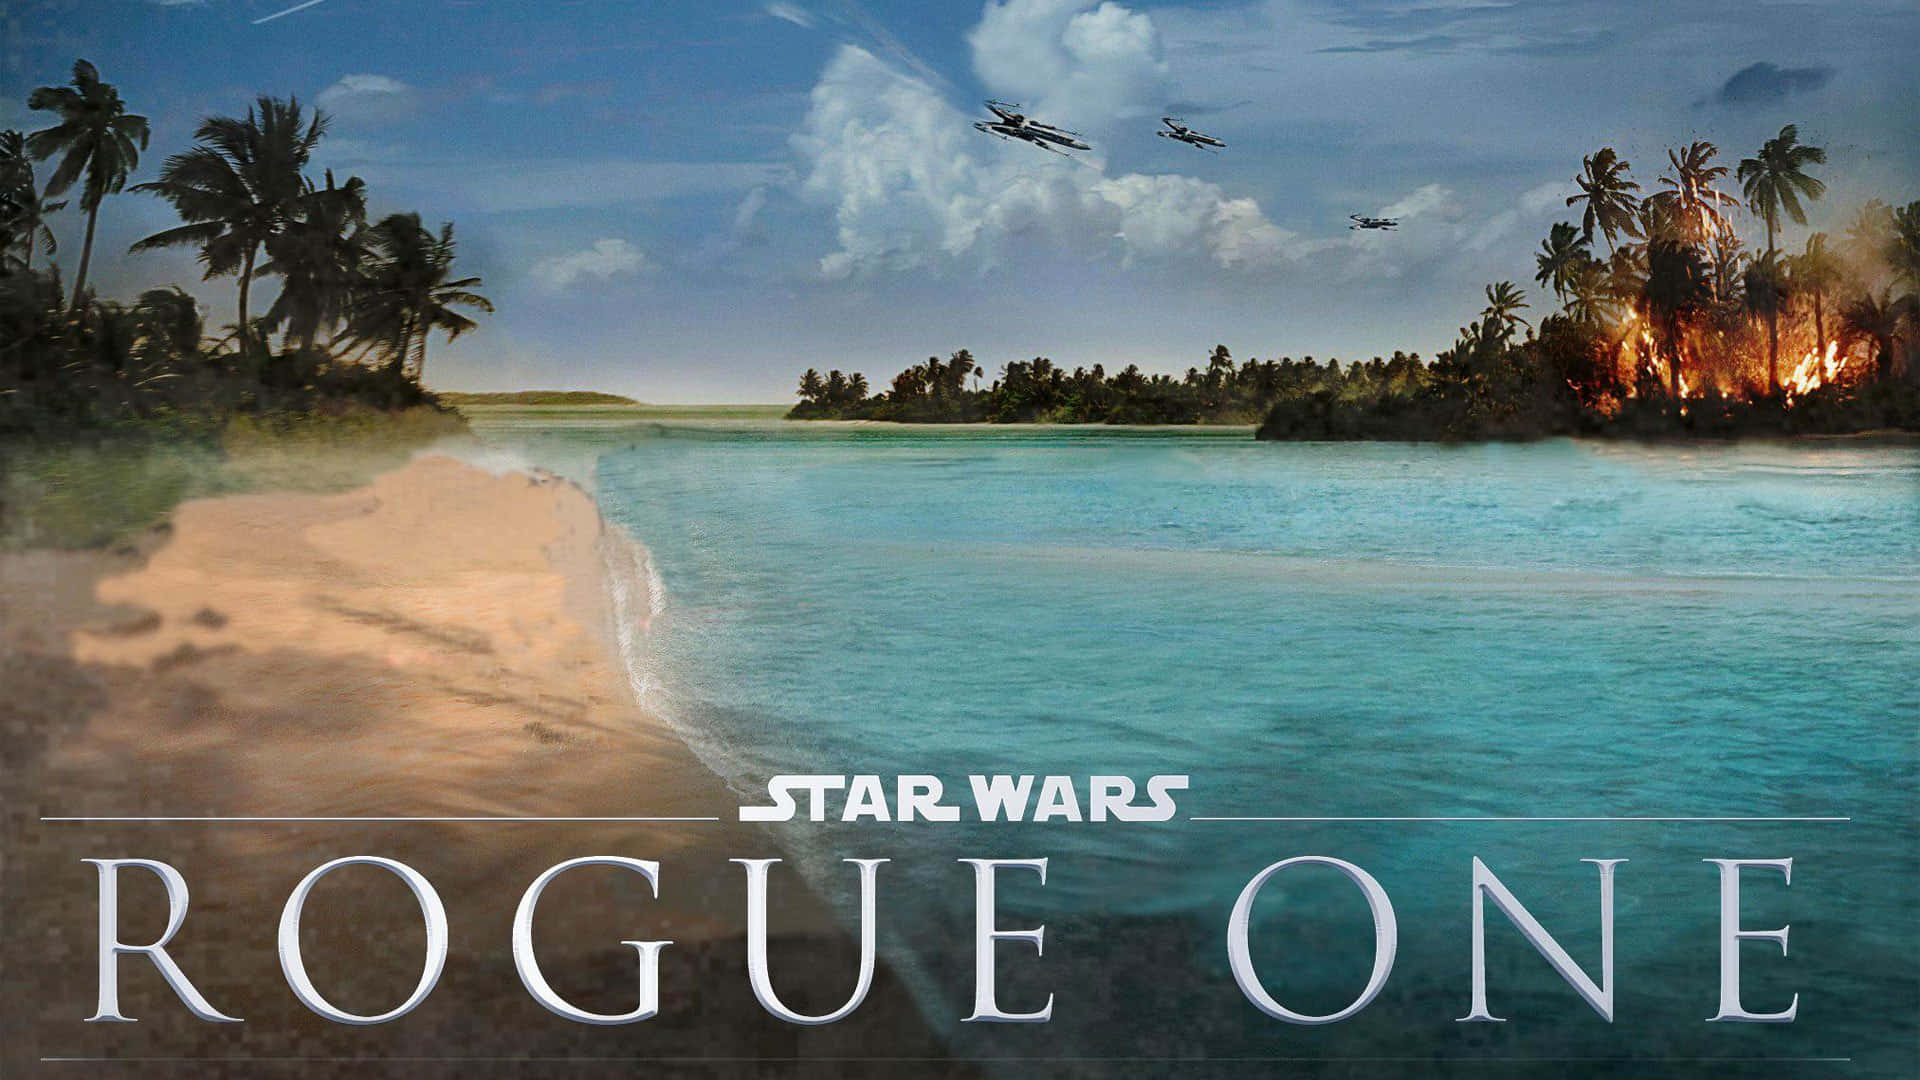 Star Wars Rogue One - A New Hope Wallpaper